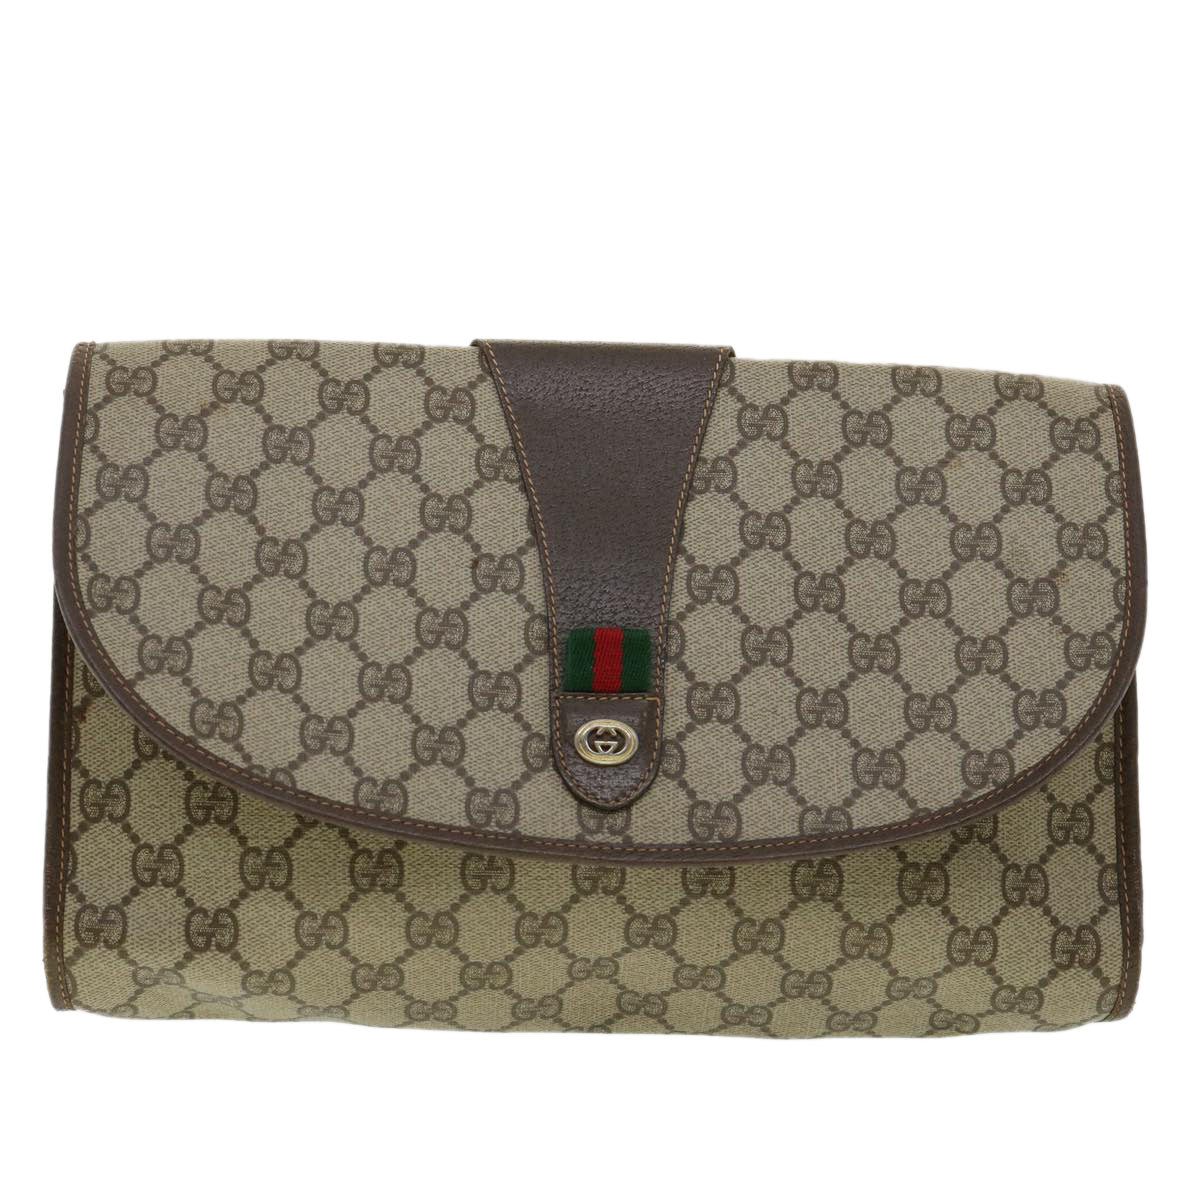 GUCCI GG Canvas Web Sherry Line Clutch Bag Beige Red Green 15601031 Auth 32362